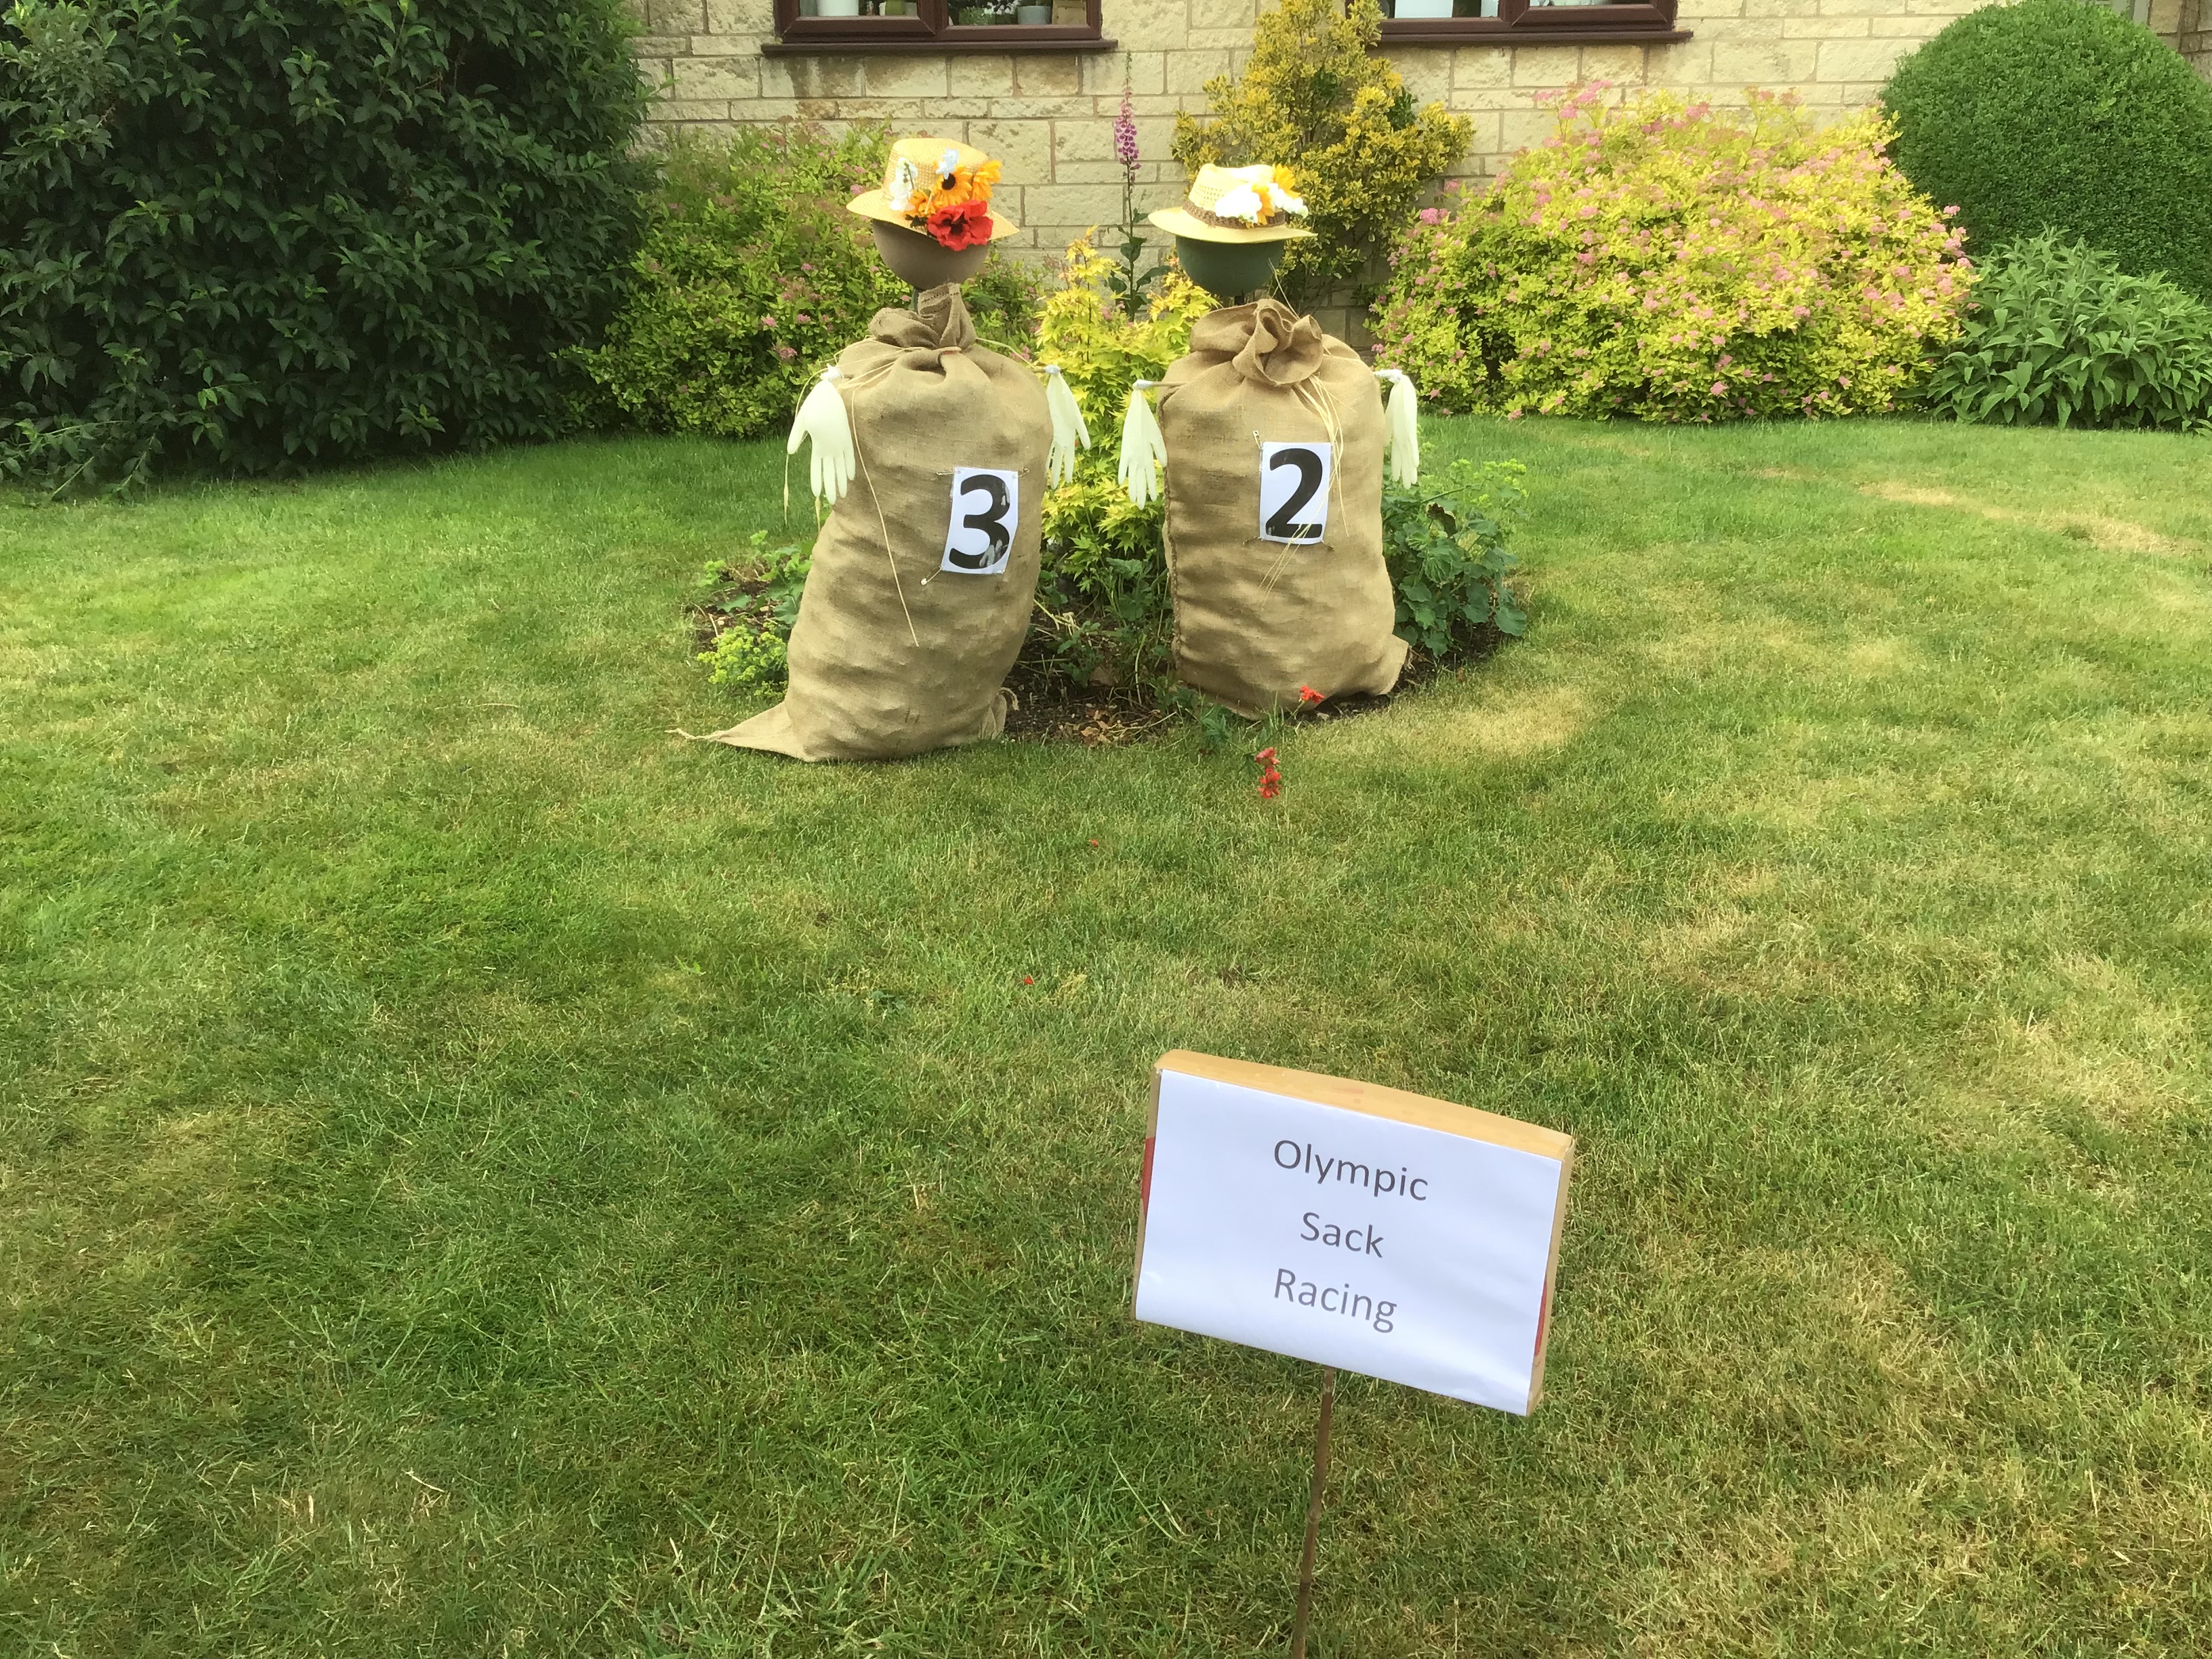 Willersey Scarecrow 31 2021